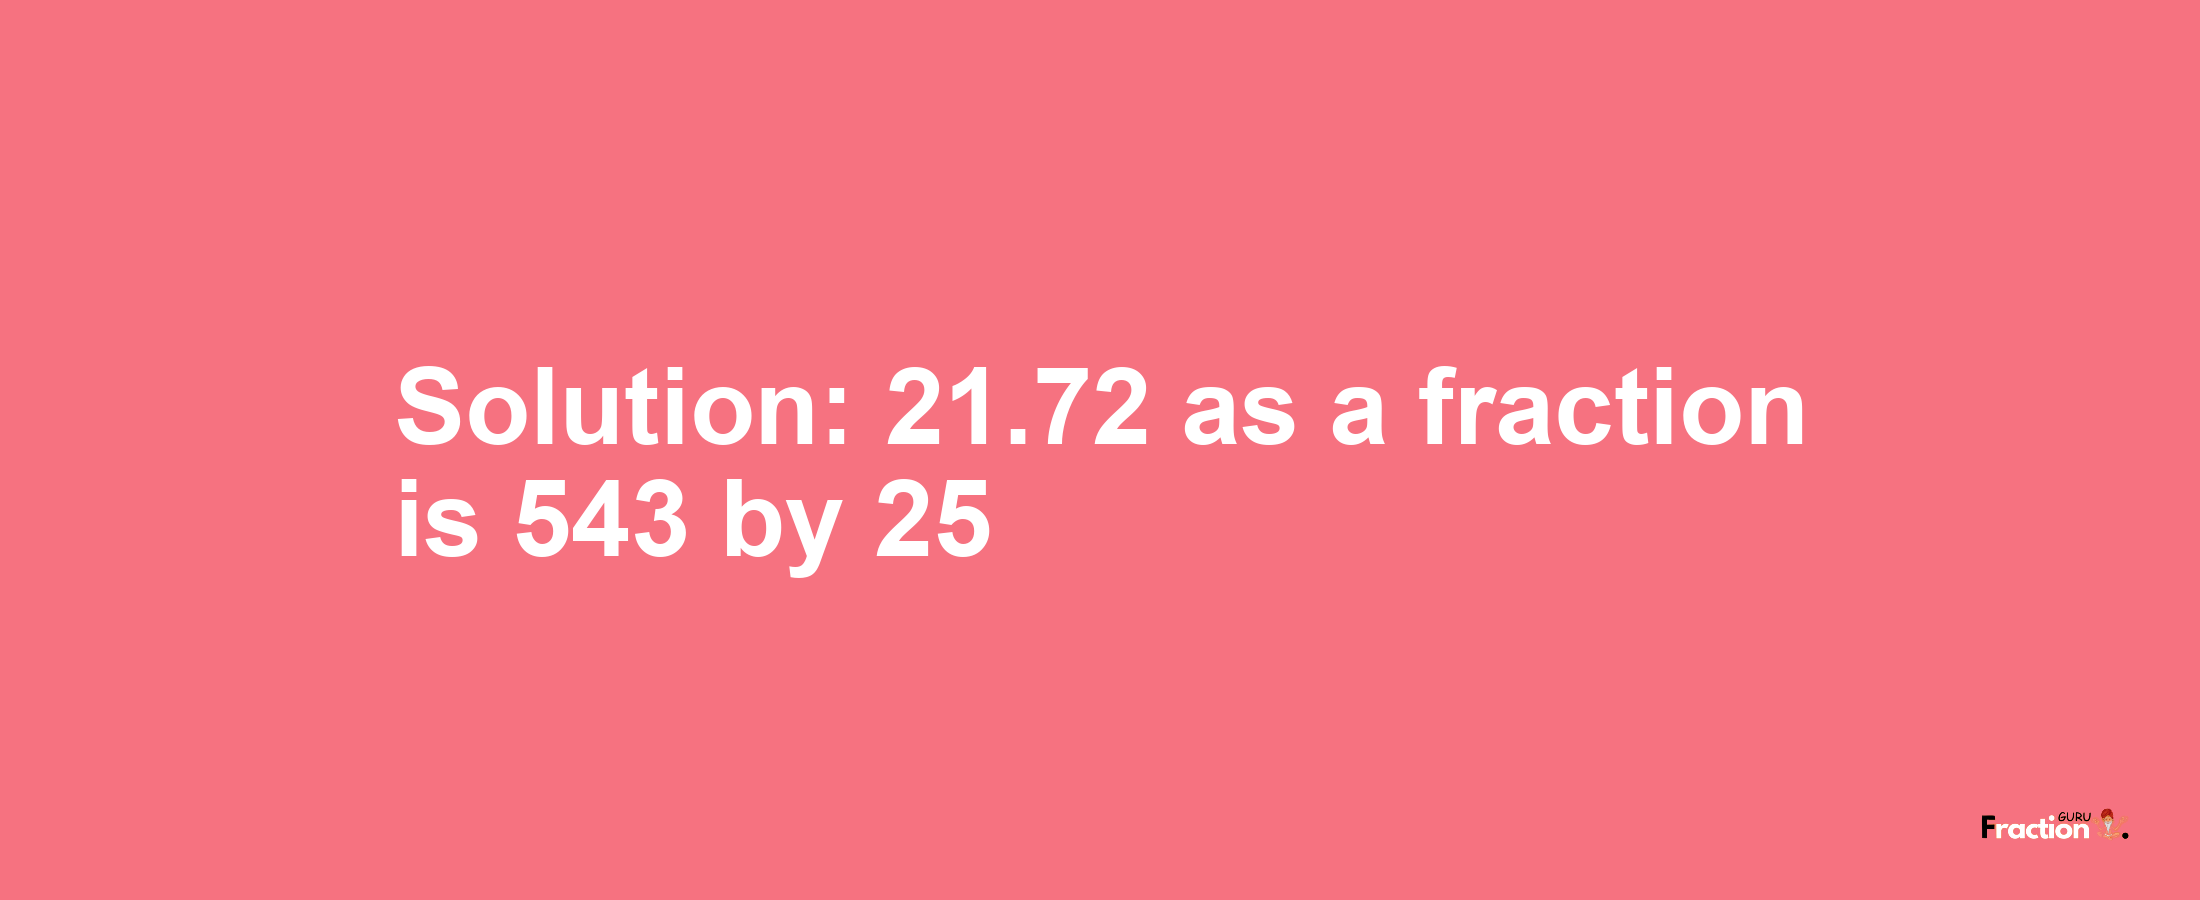 Solution:21.72 as a fraction is 543/25